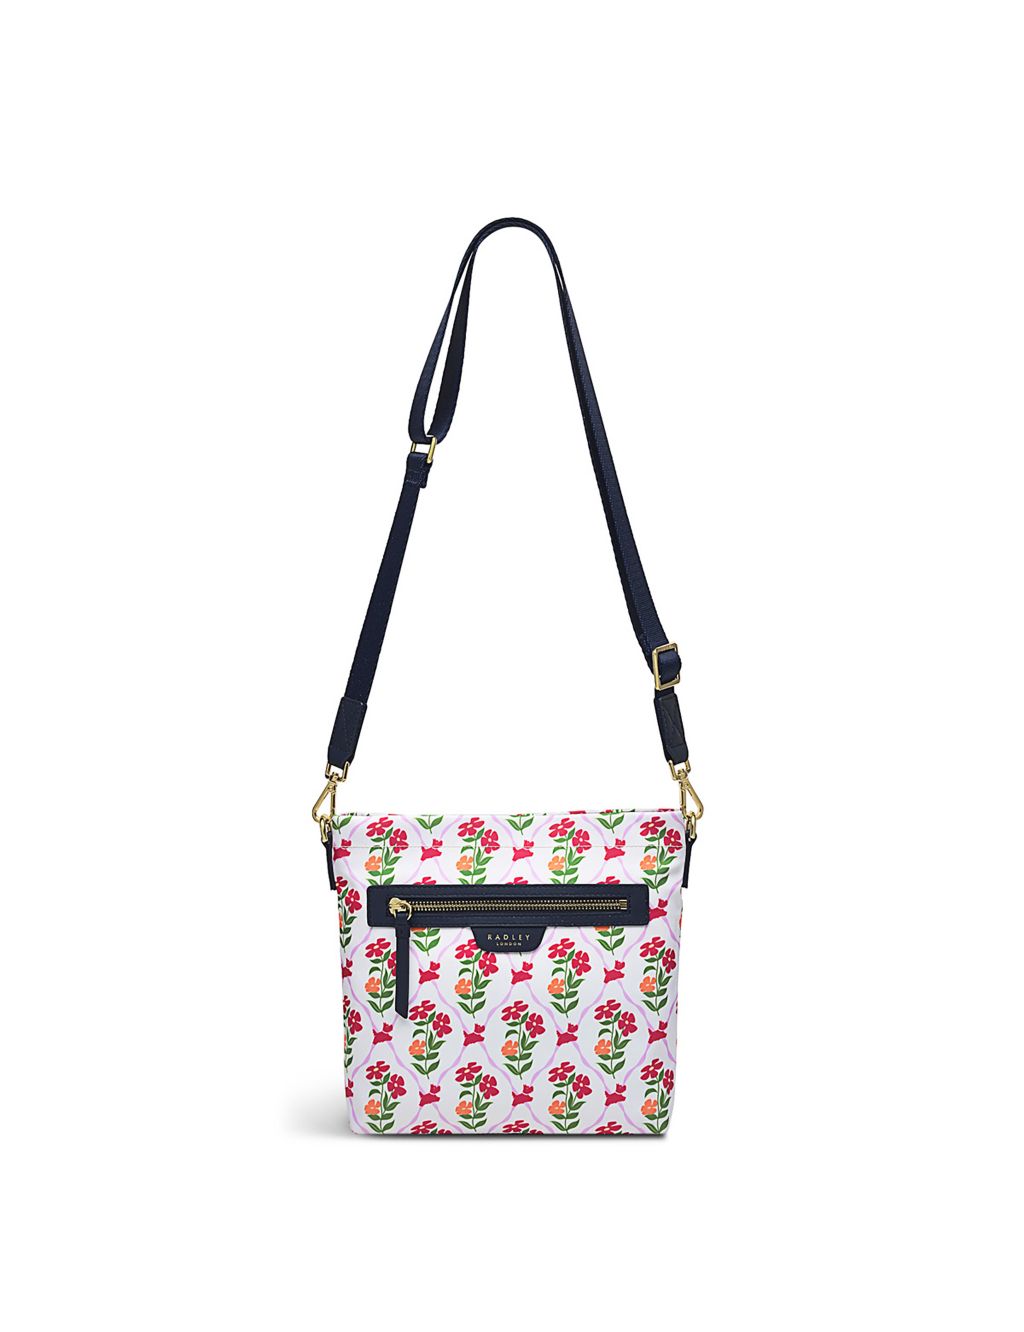 Finsbury Park Floral Cross Body Bag 1 of 5